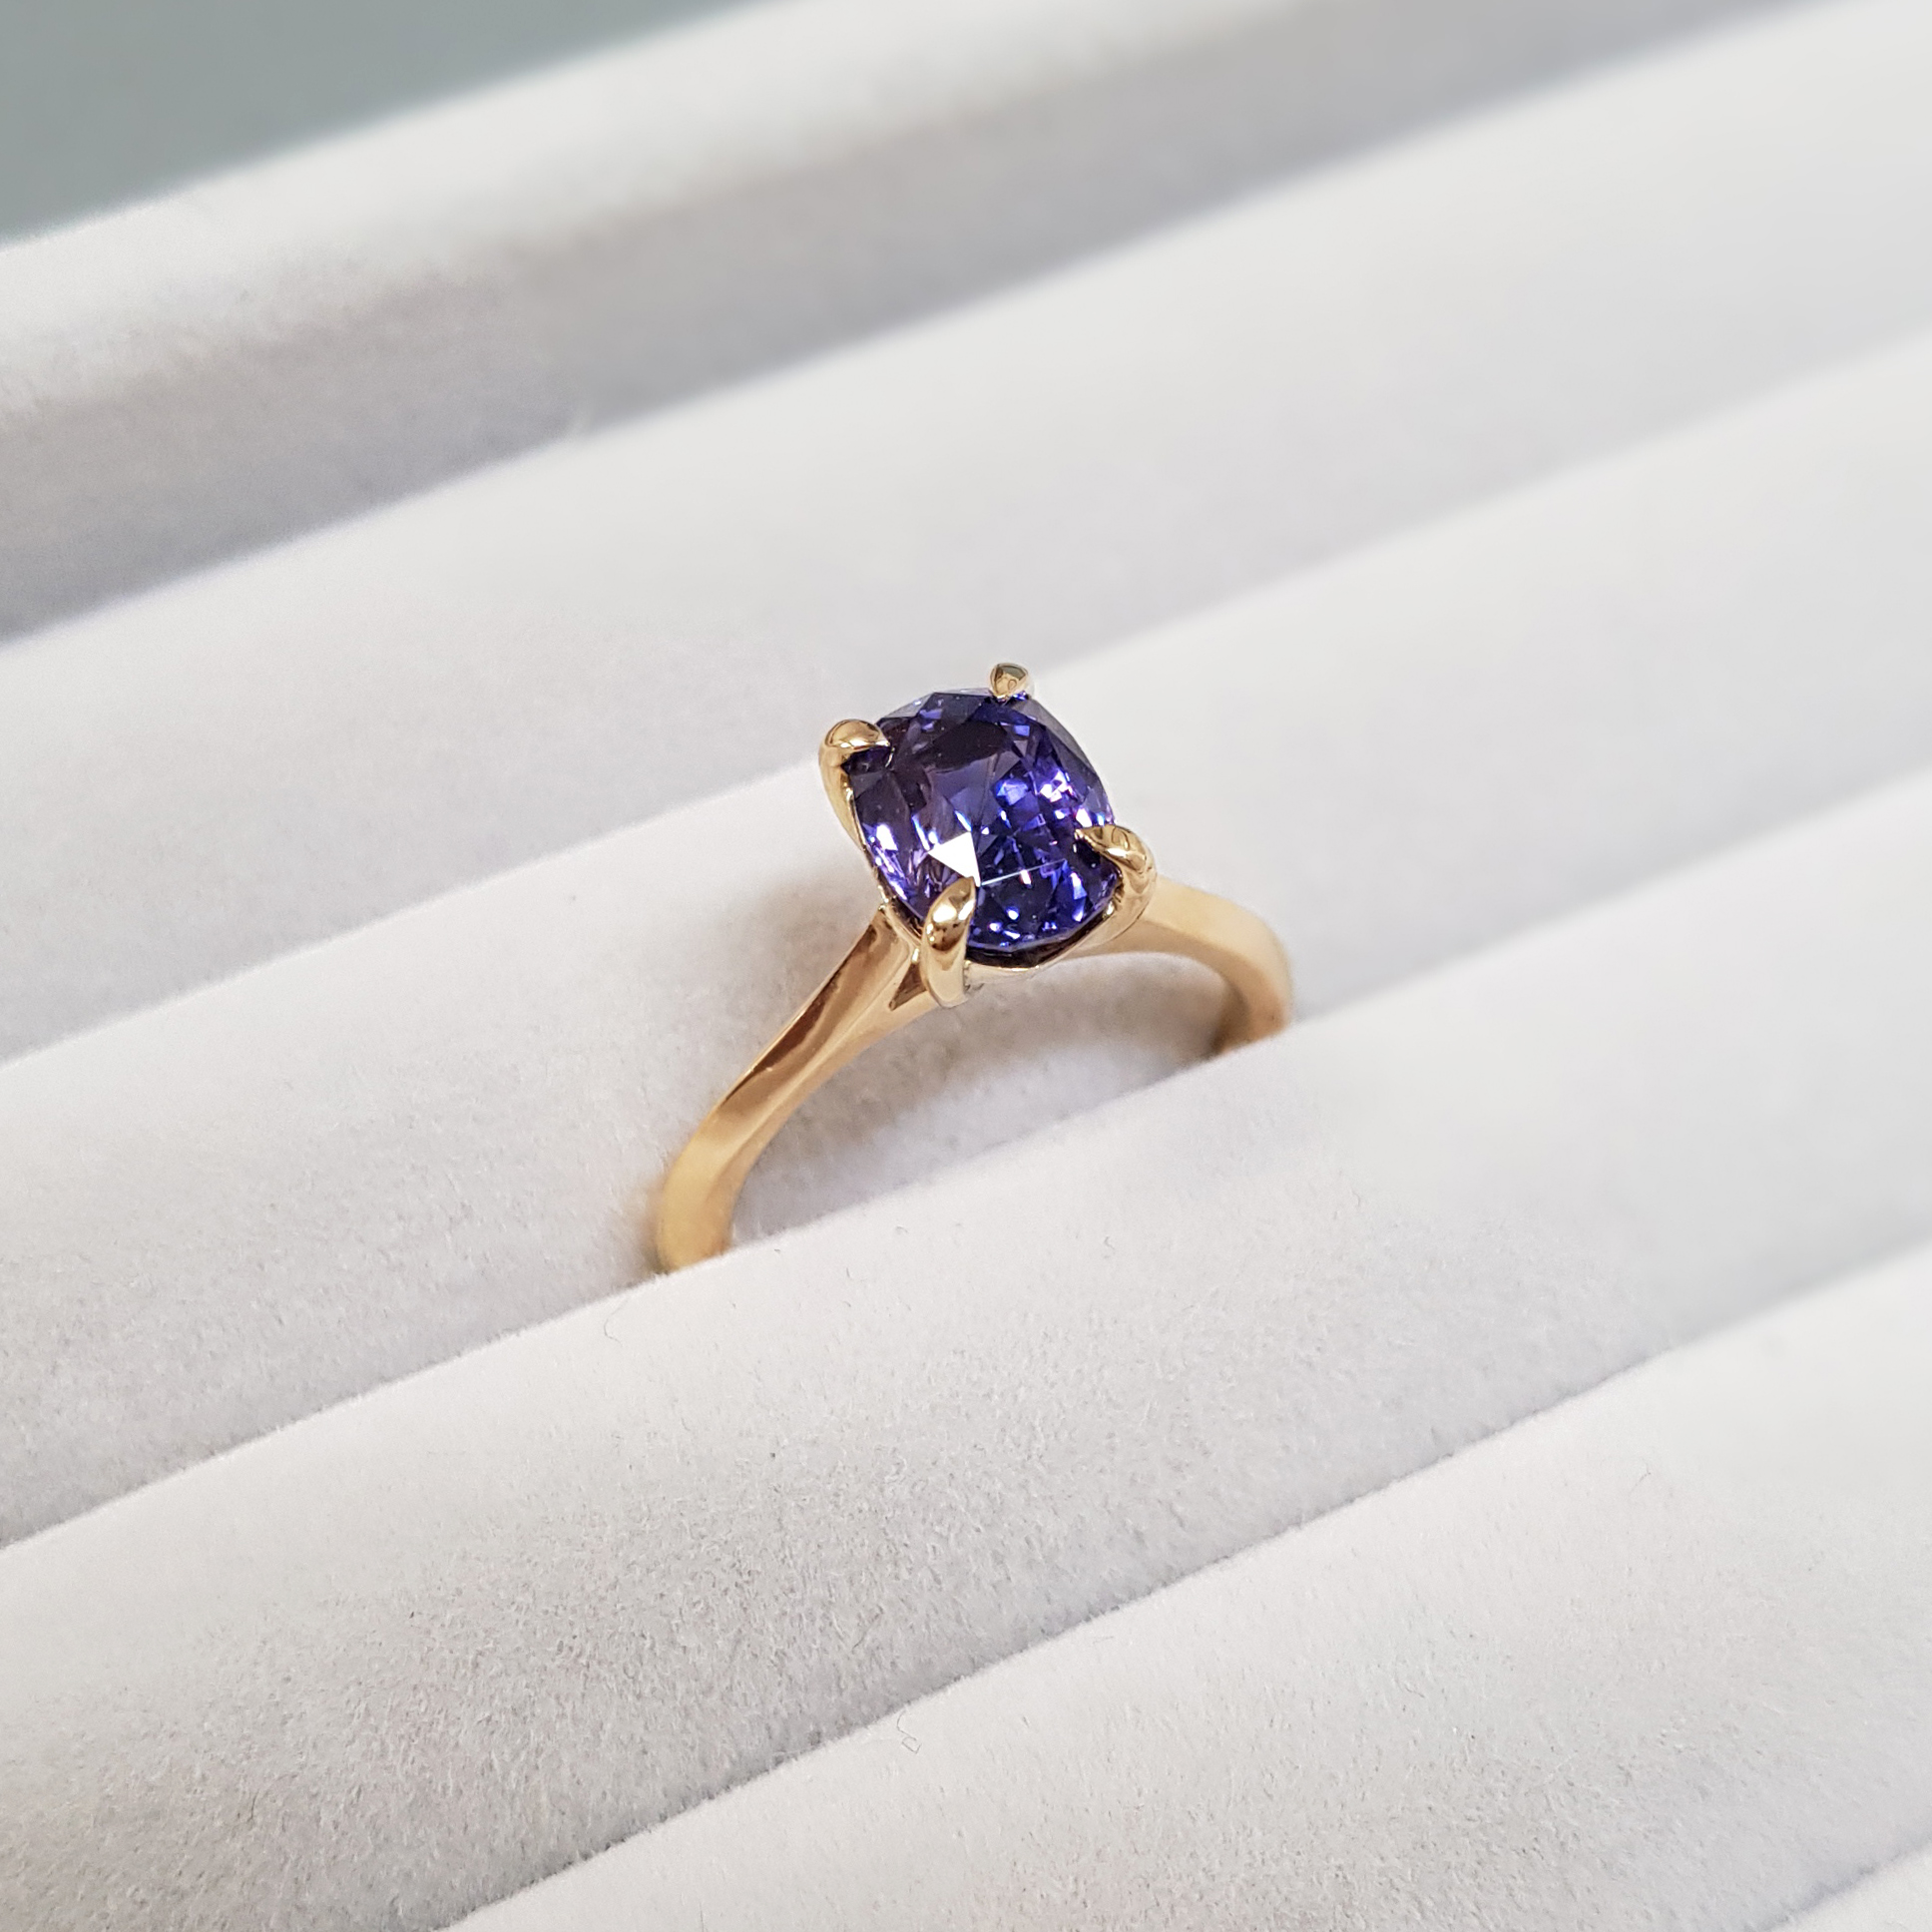 solitaire purple sapphire ring with a yellow gold band on a grey fabric background